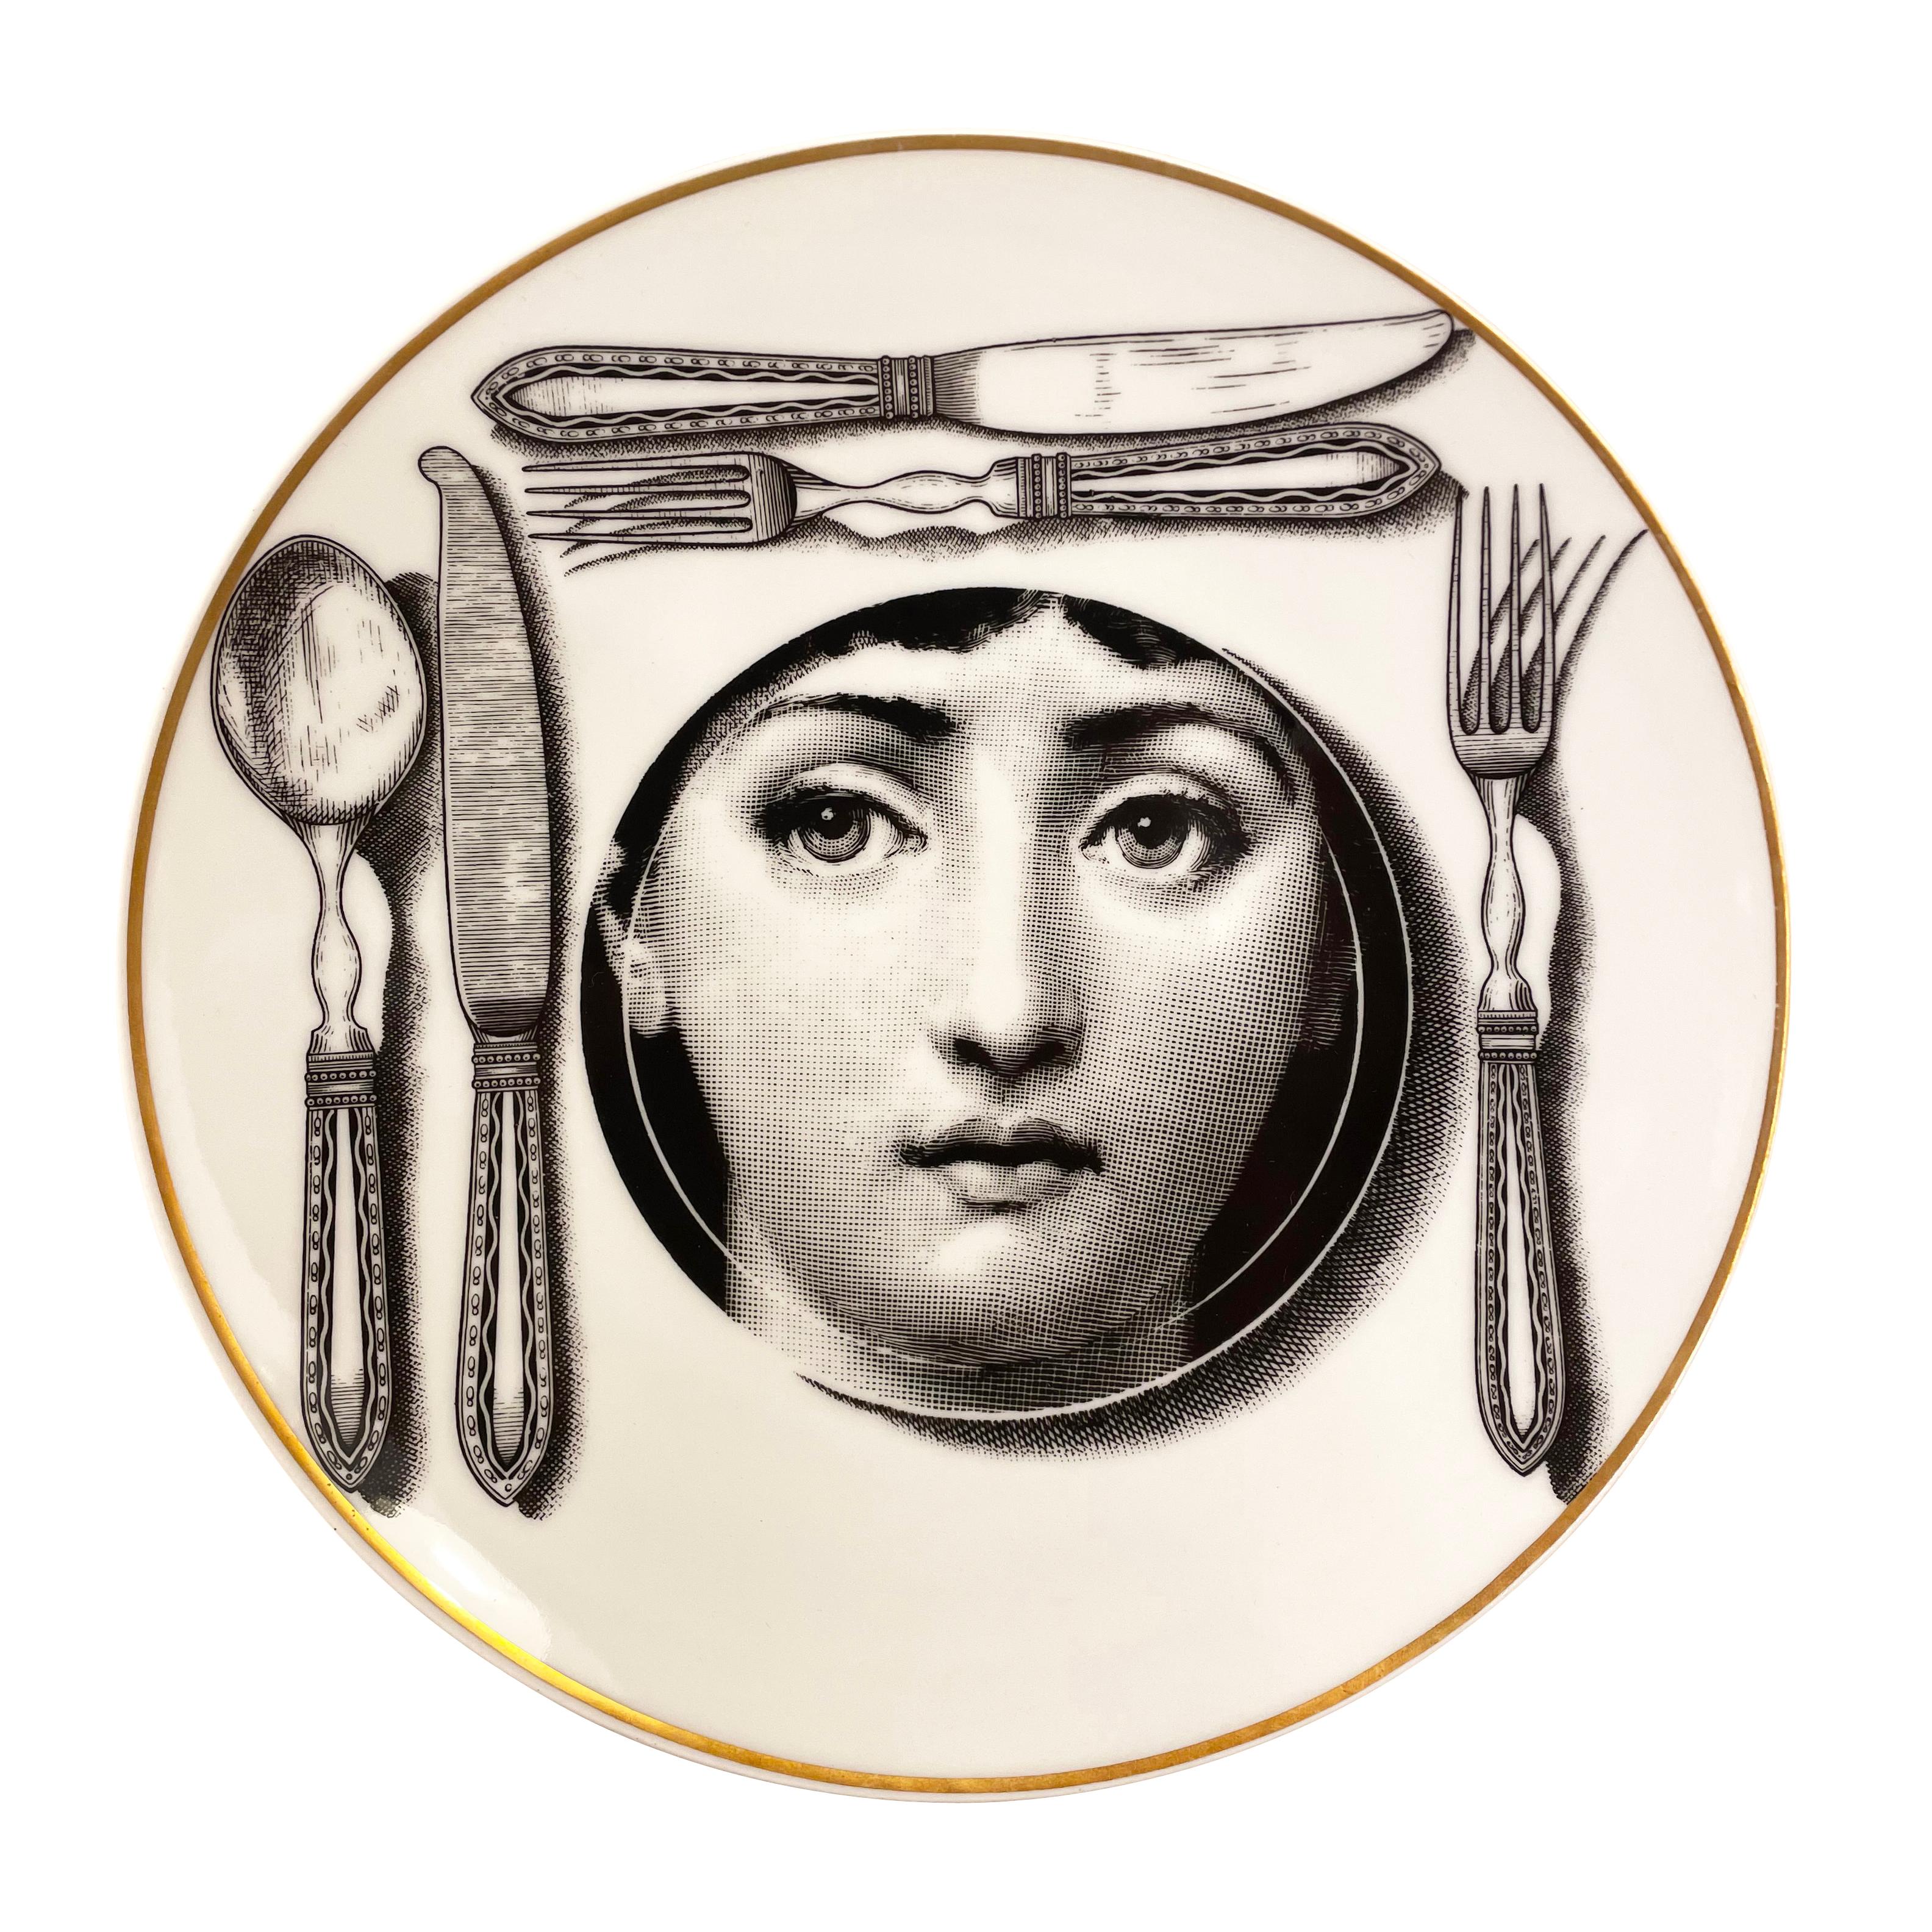 Piero Fornasetti ceramic plate made by Ronsenthal in the 1980s. From the “Temi e Variazioni” series portraying Fornasetti’s fictional character, Giulia. Original box included. 

Condition: Excellent vintage condition, minor wear consistent with